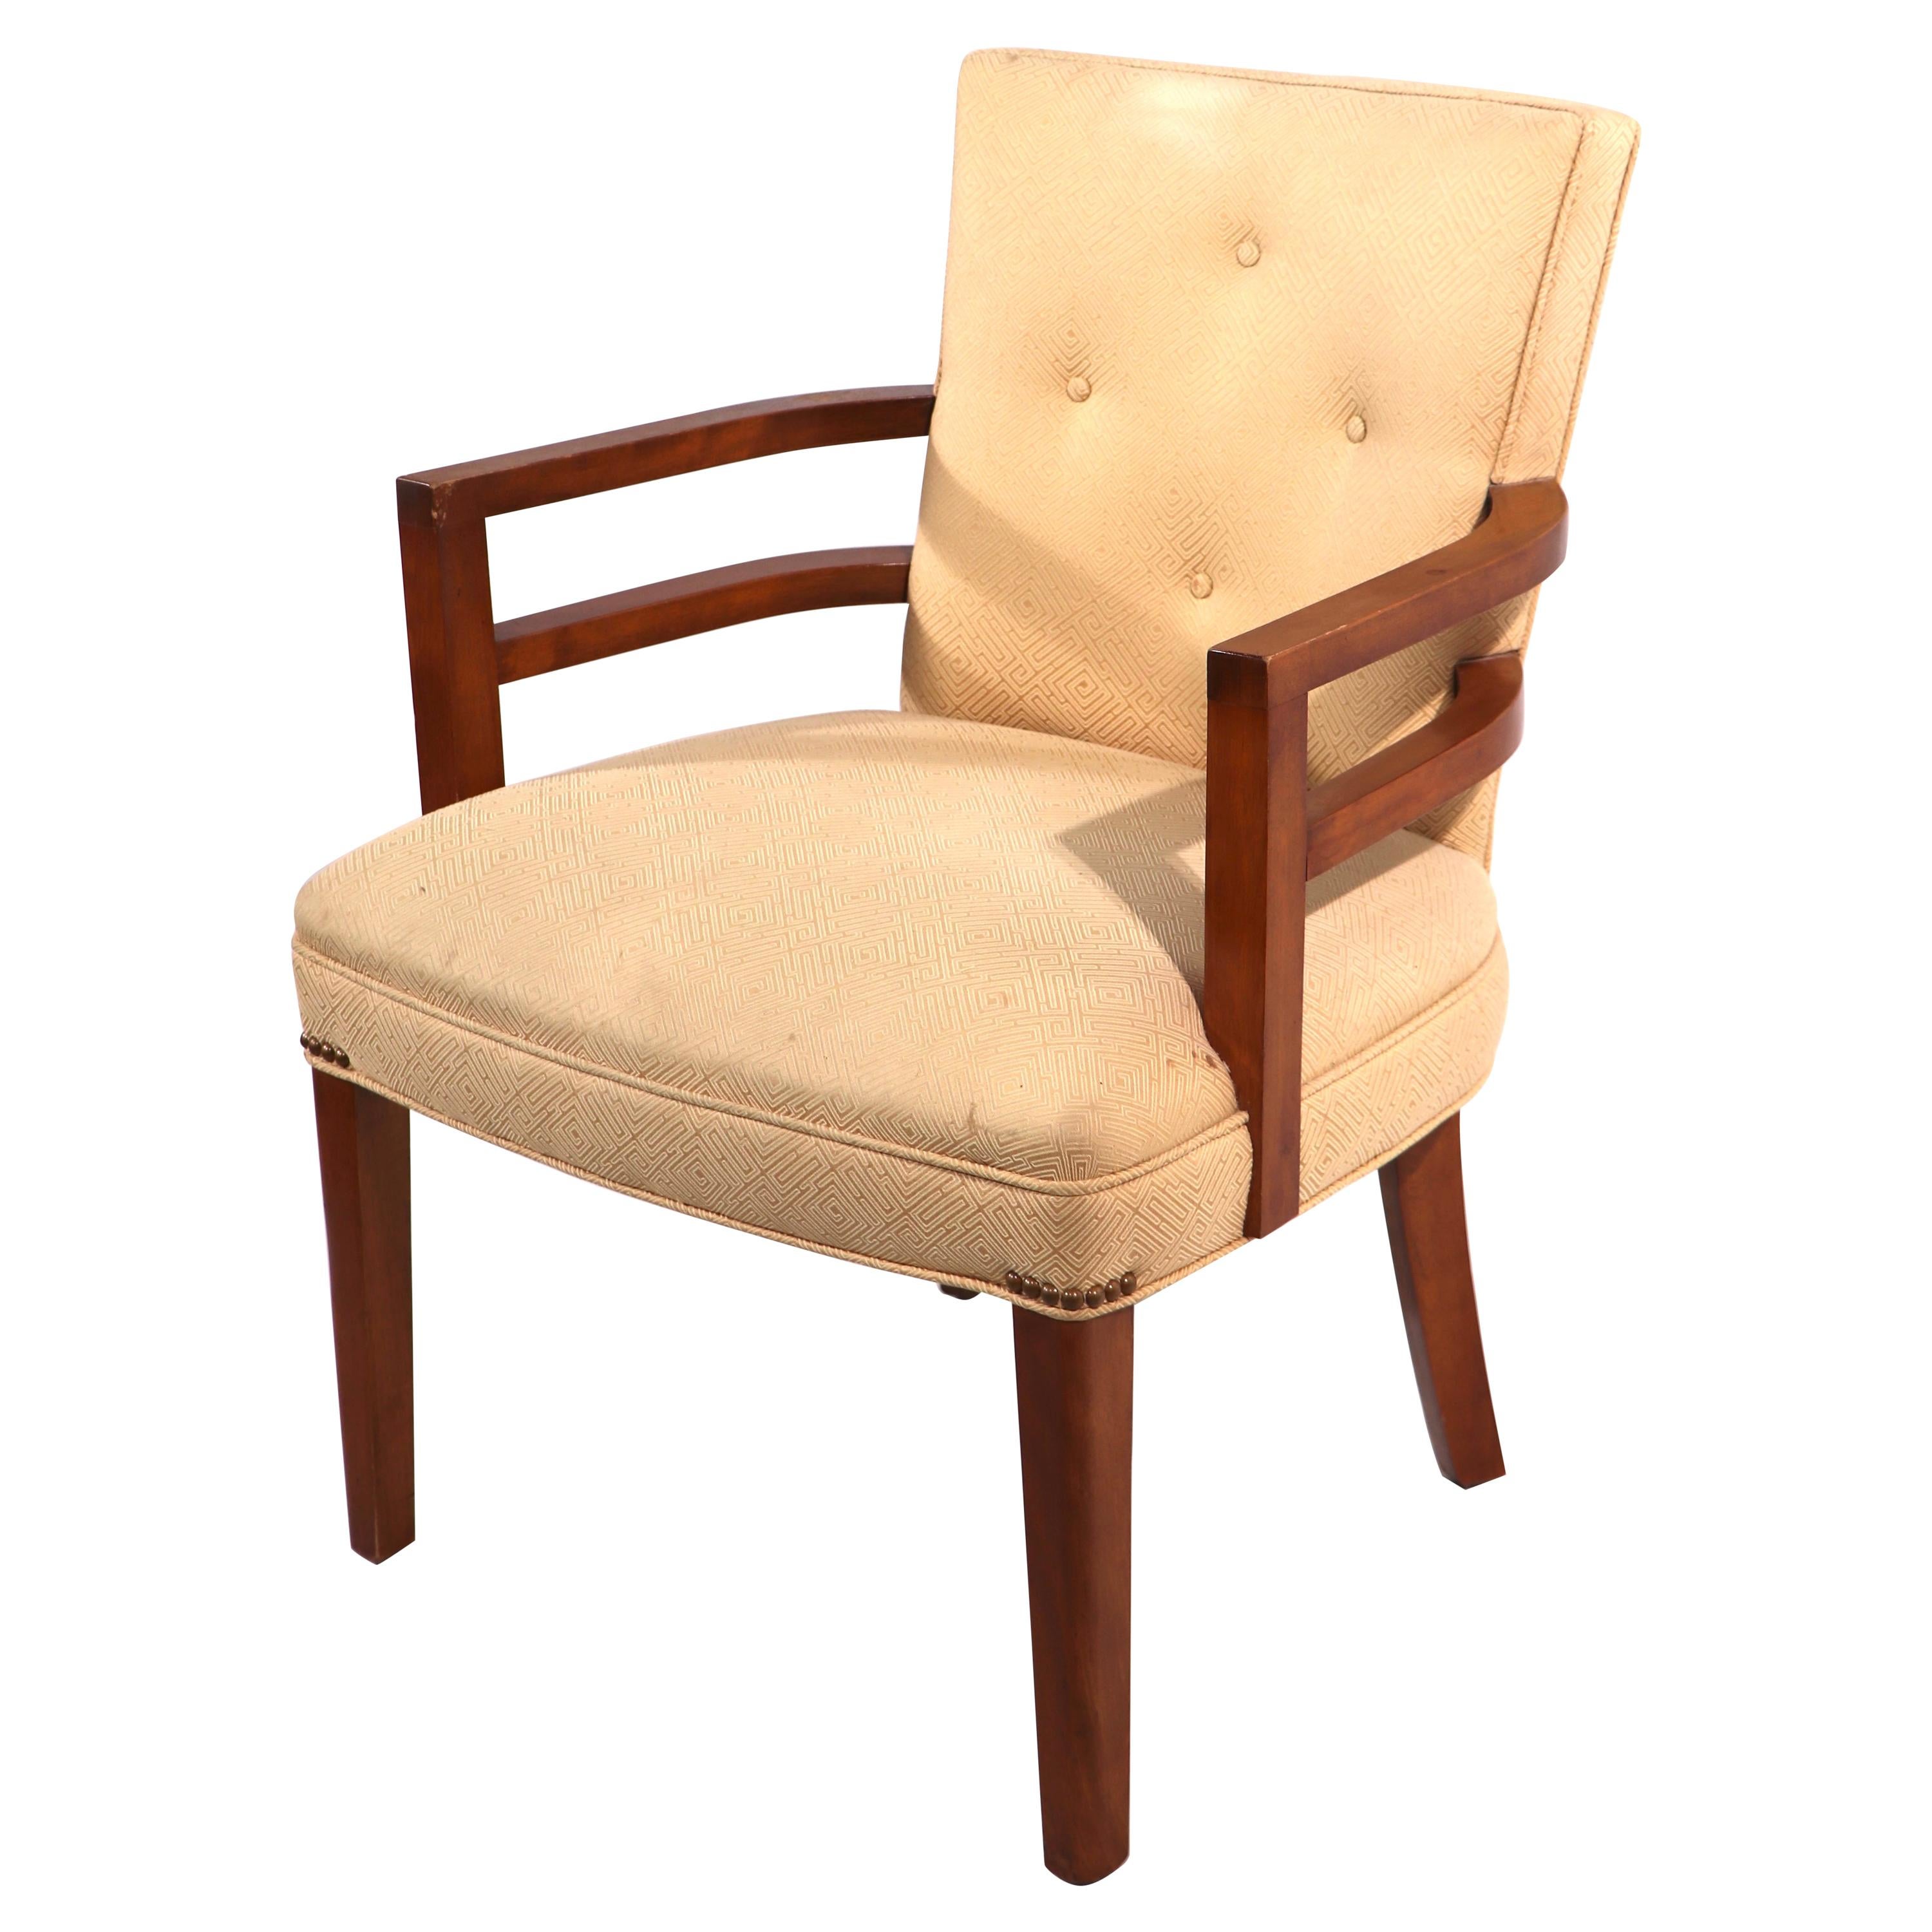 Machine Age Art Deco Arm Chair in the Style of Gilbert Rohde